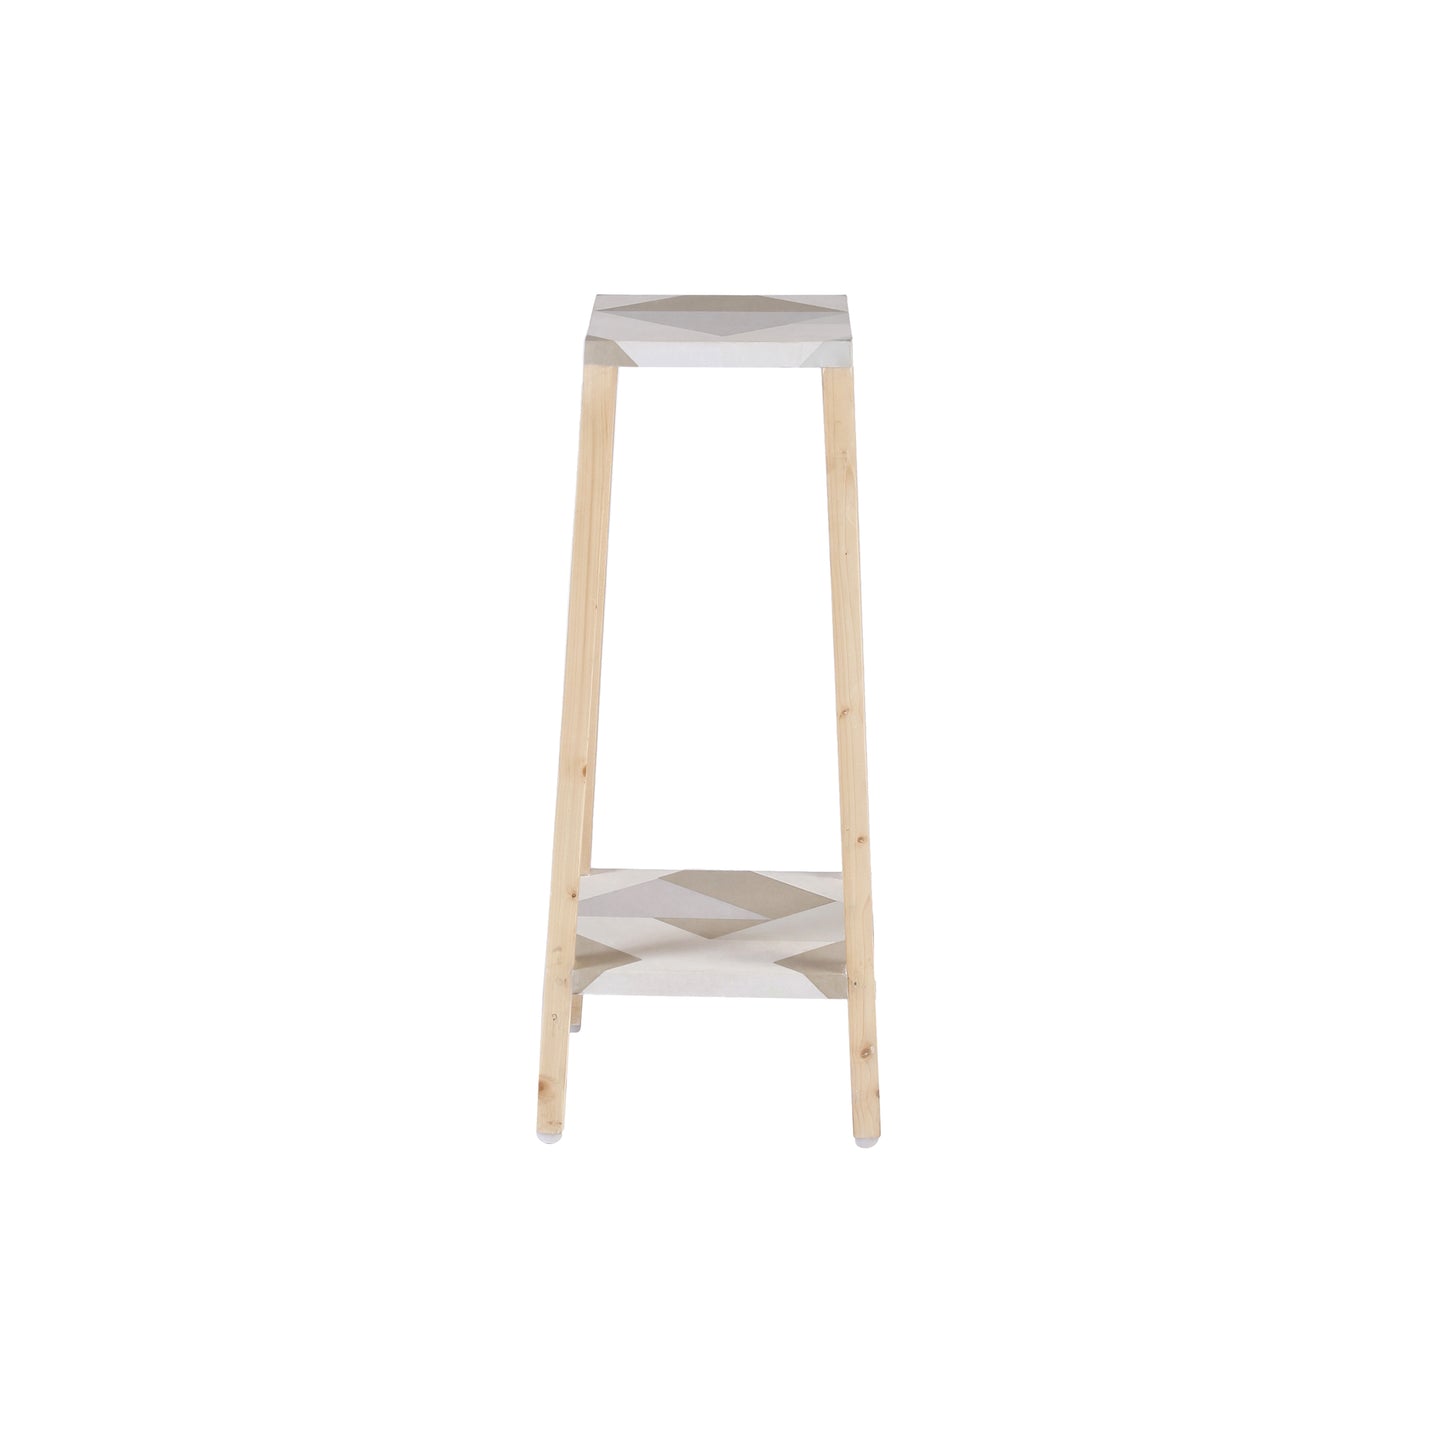 A Tiny Mistake Square Four Legged Tapering Two Tier Decorative Stand Two Tiers) (Geometric Base with Light Legs)